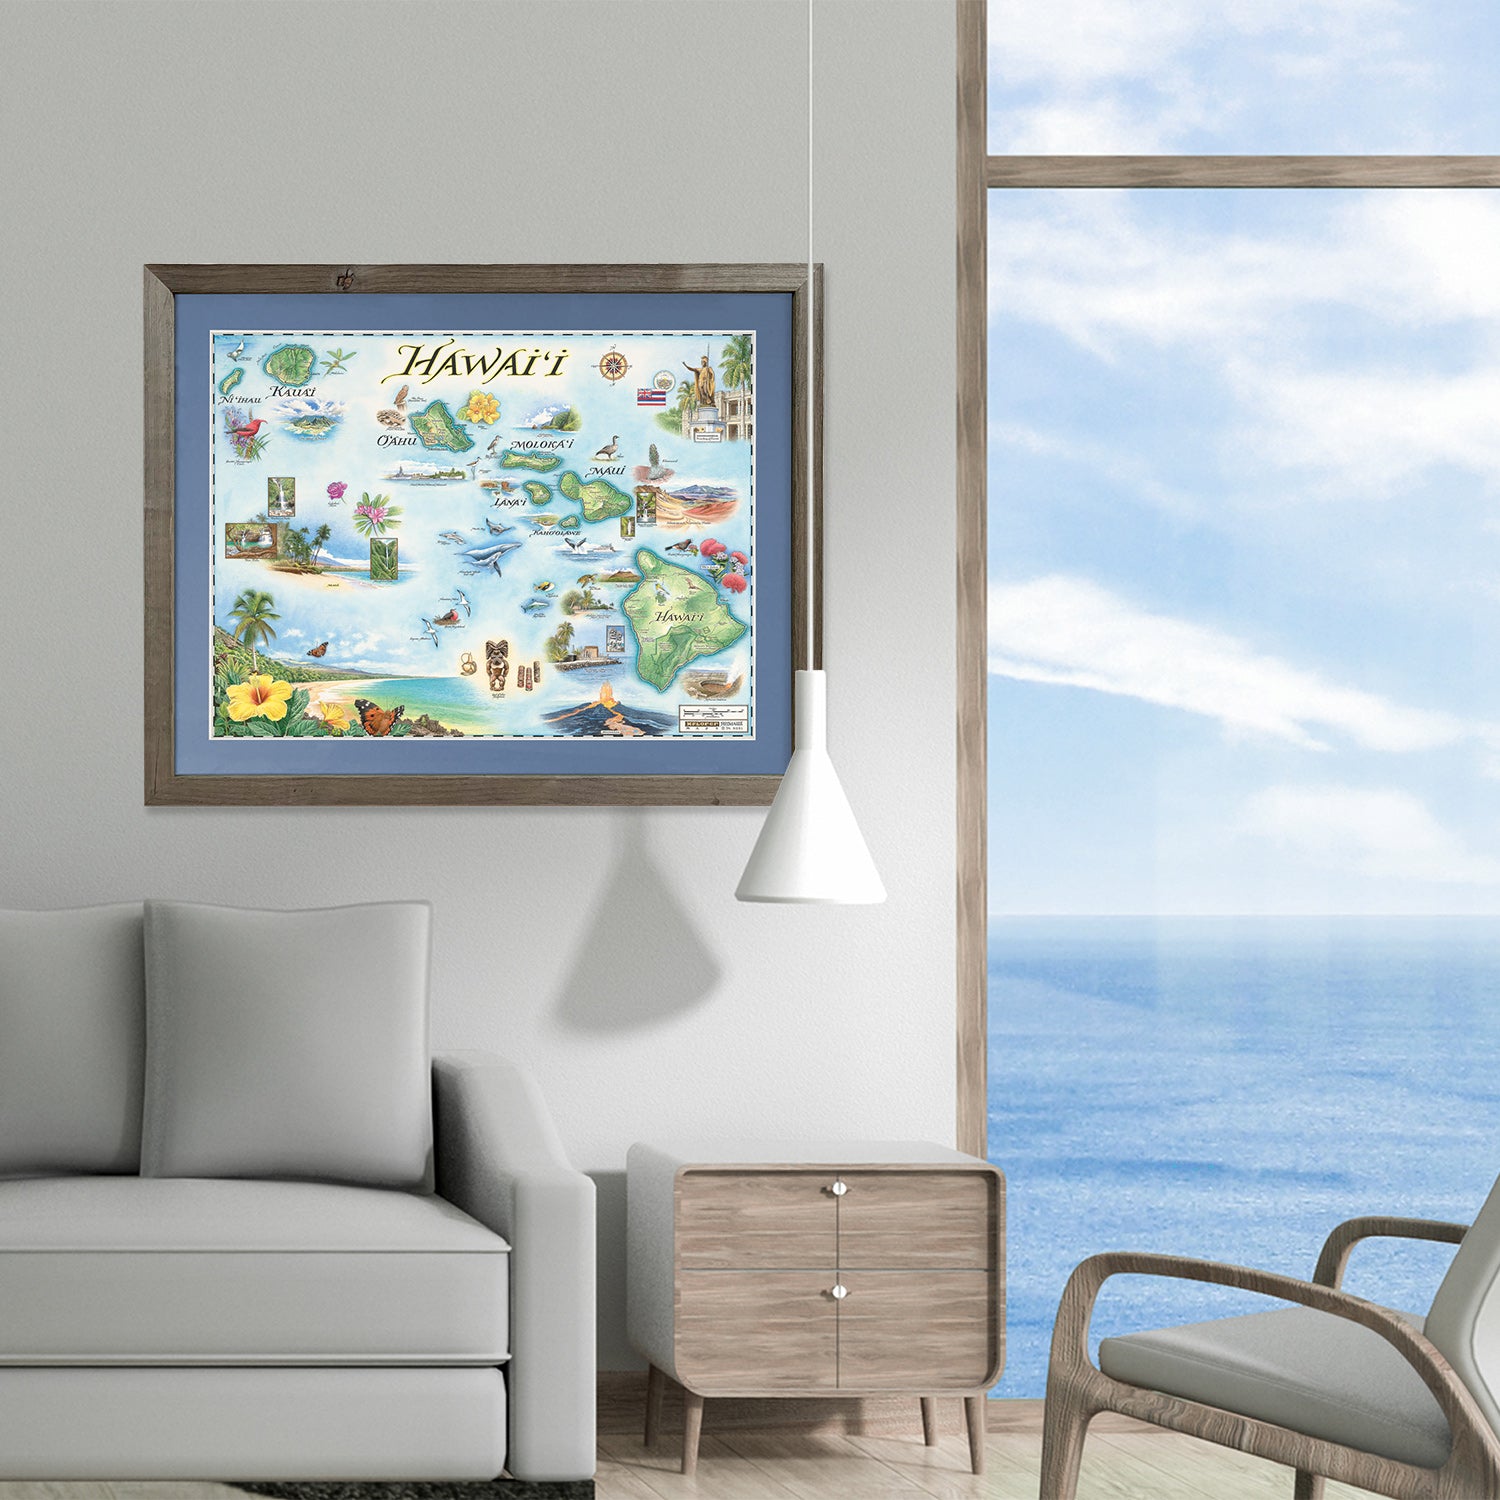 Xplorer Maps state map of Hawaii hangs framed in a living room above a white couch. A lamp hangs over a side table. The window in the background shows the ocean outside. 